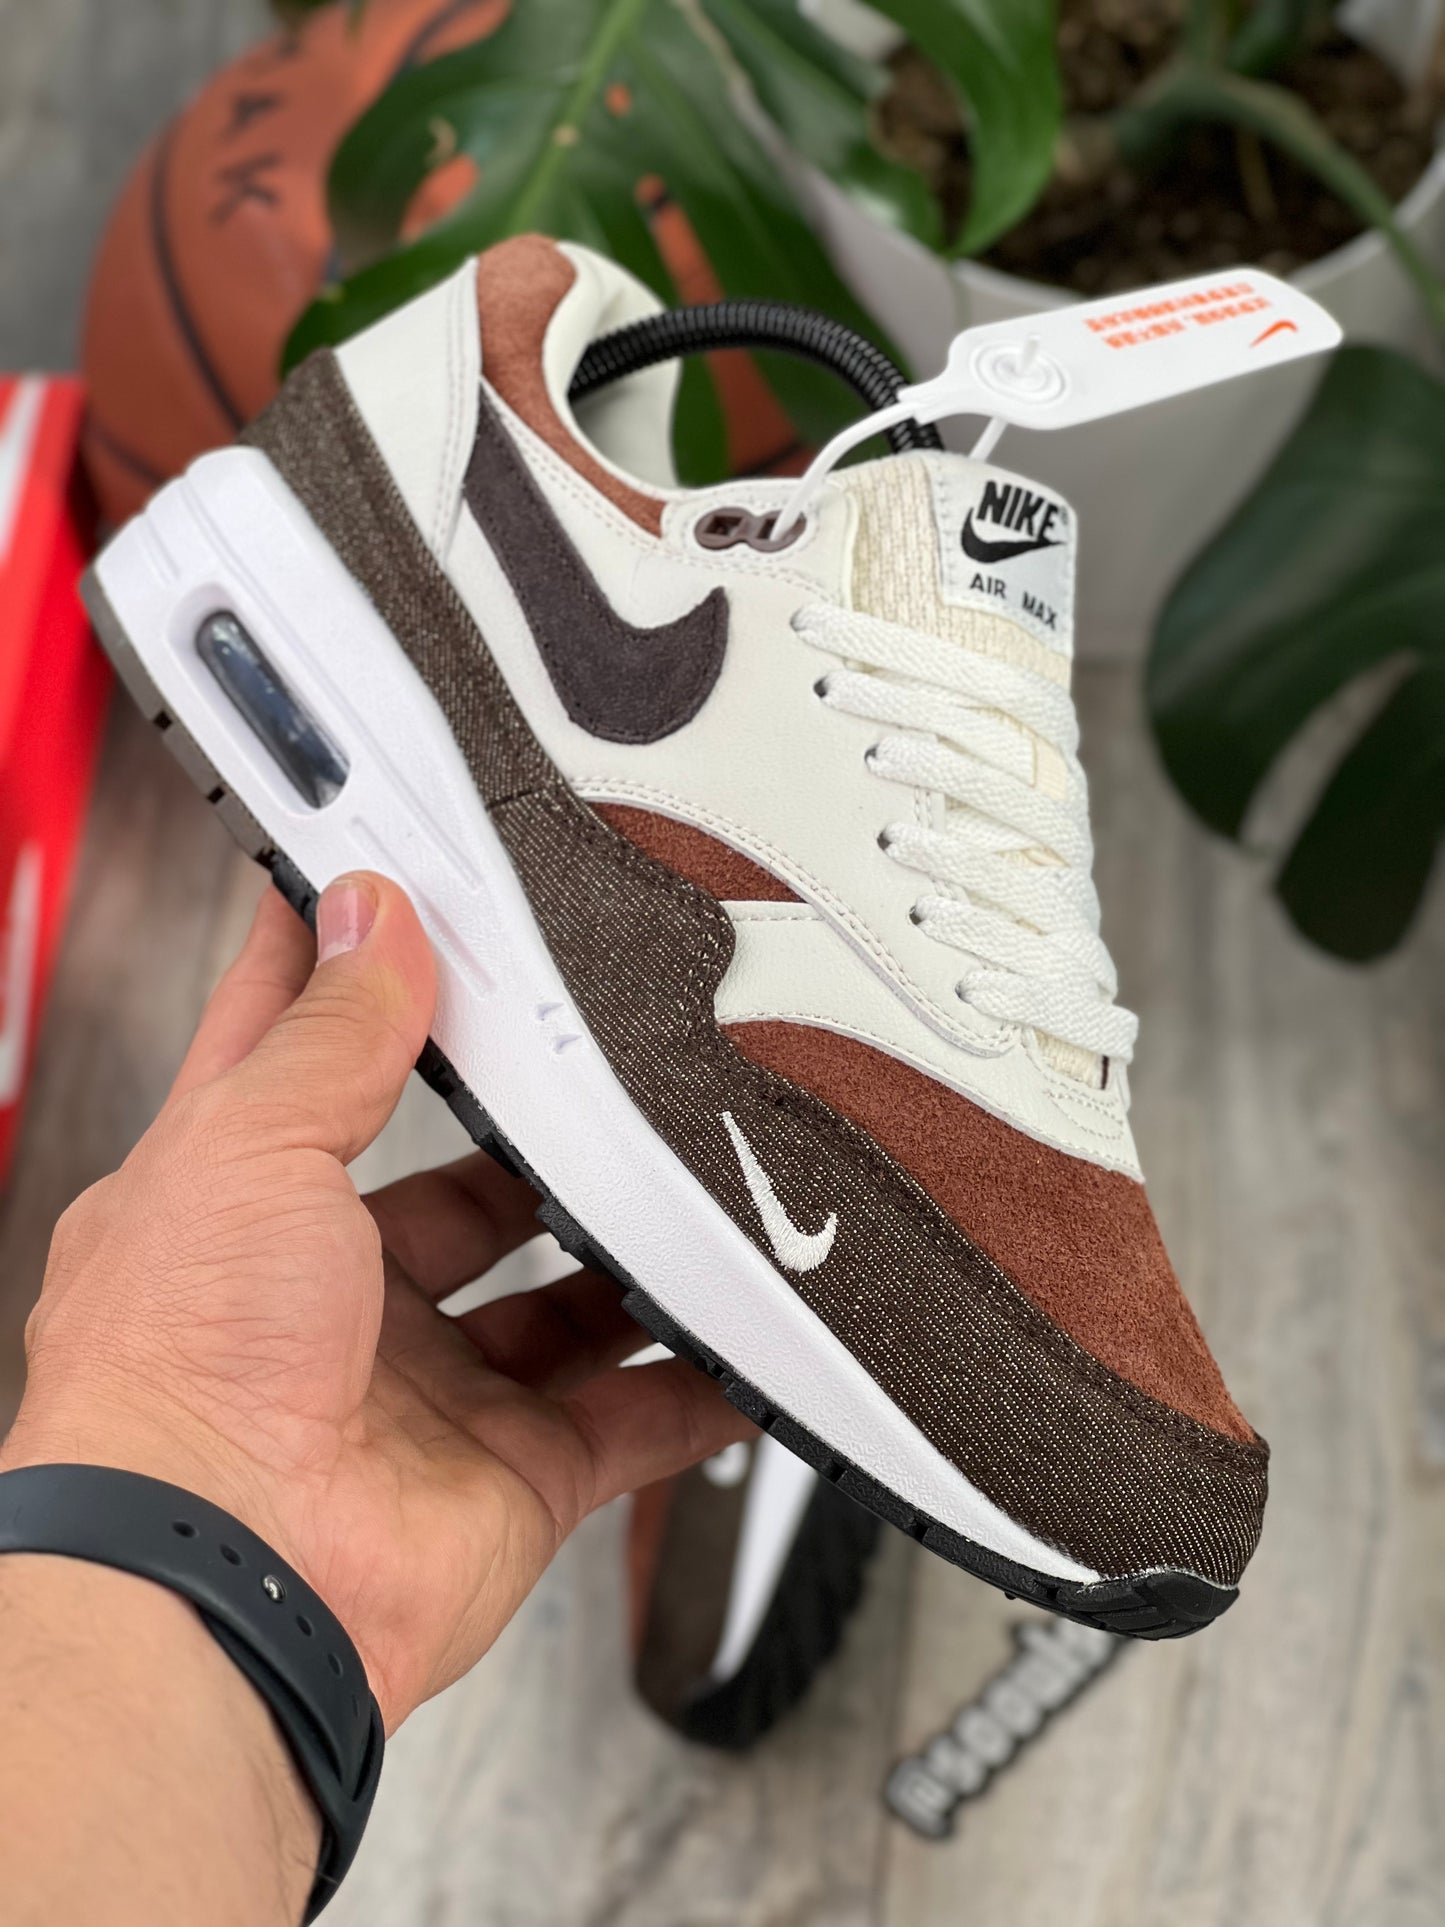 Nike Air Max 1
size? Exclusive Considered